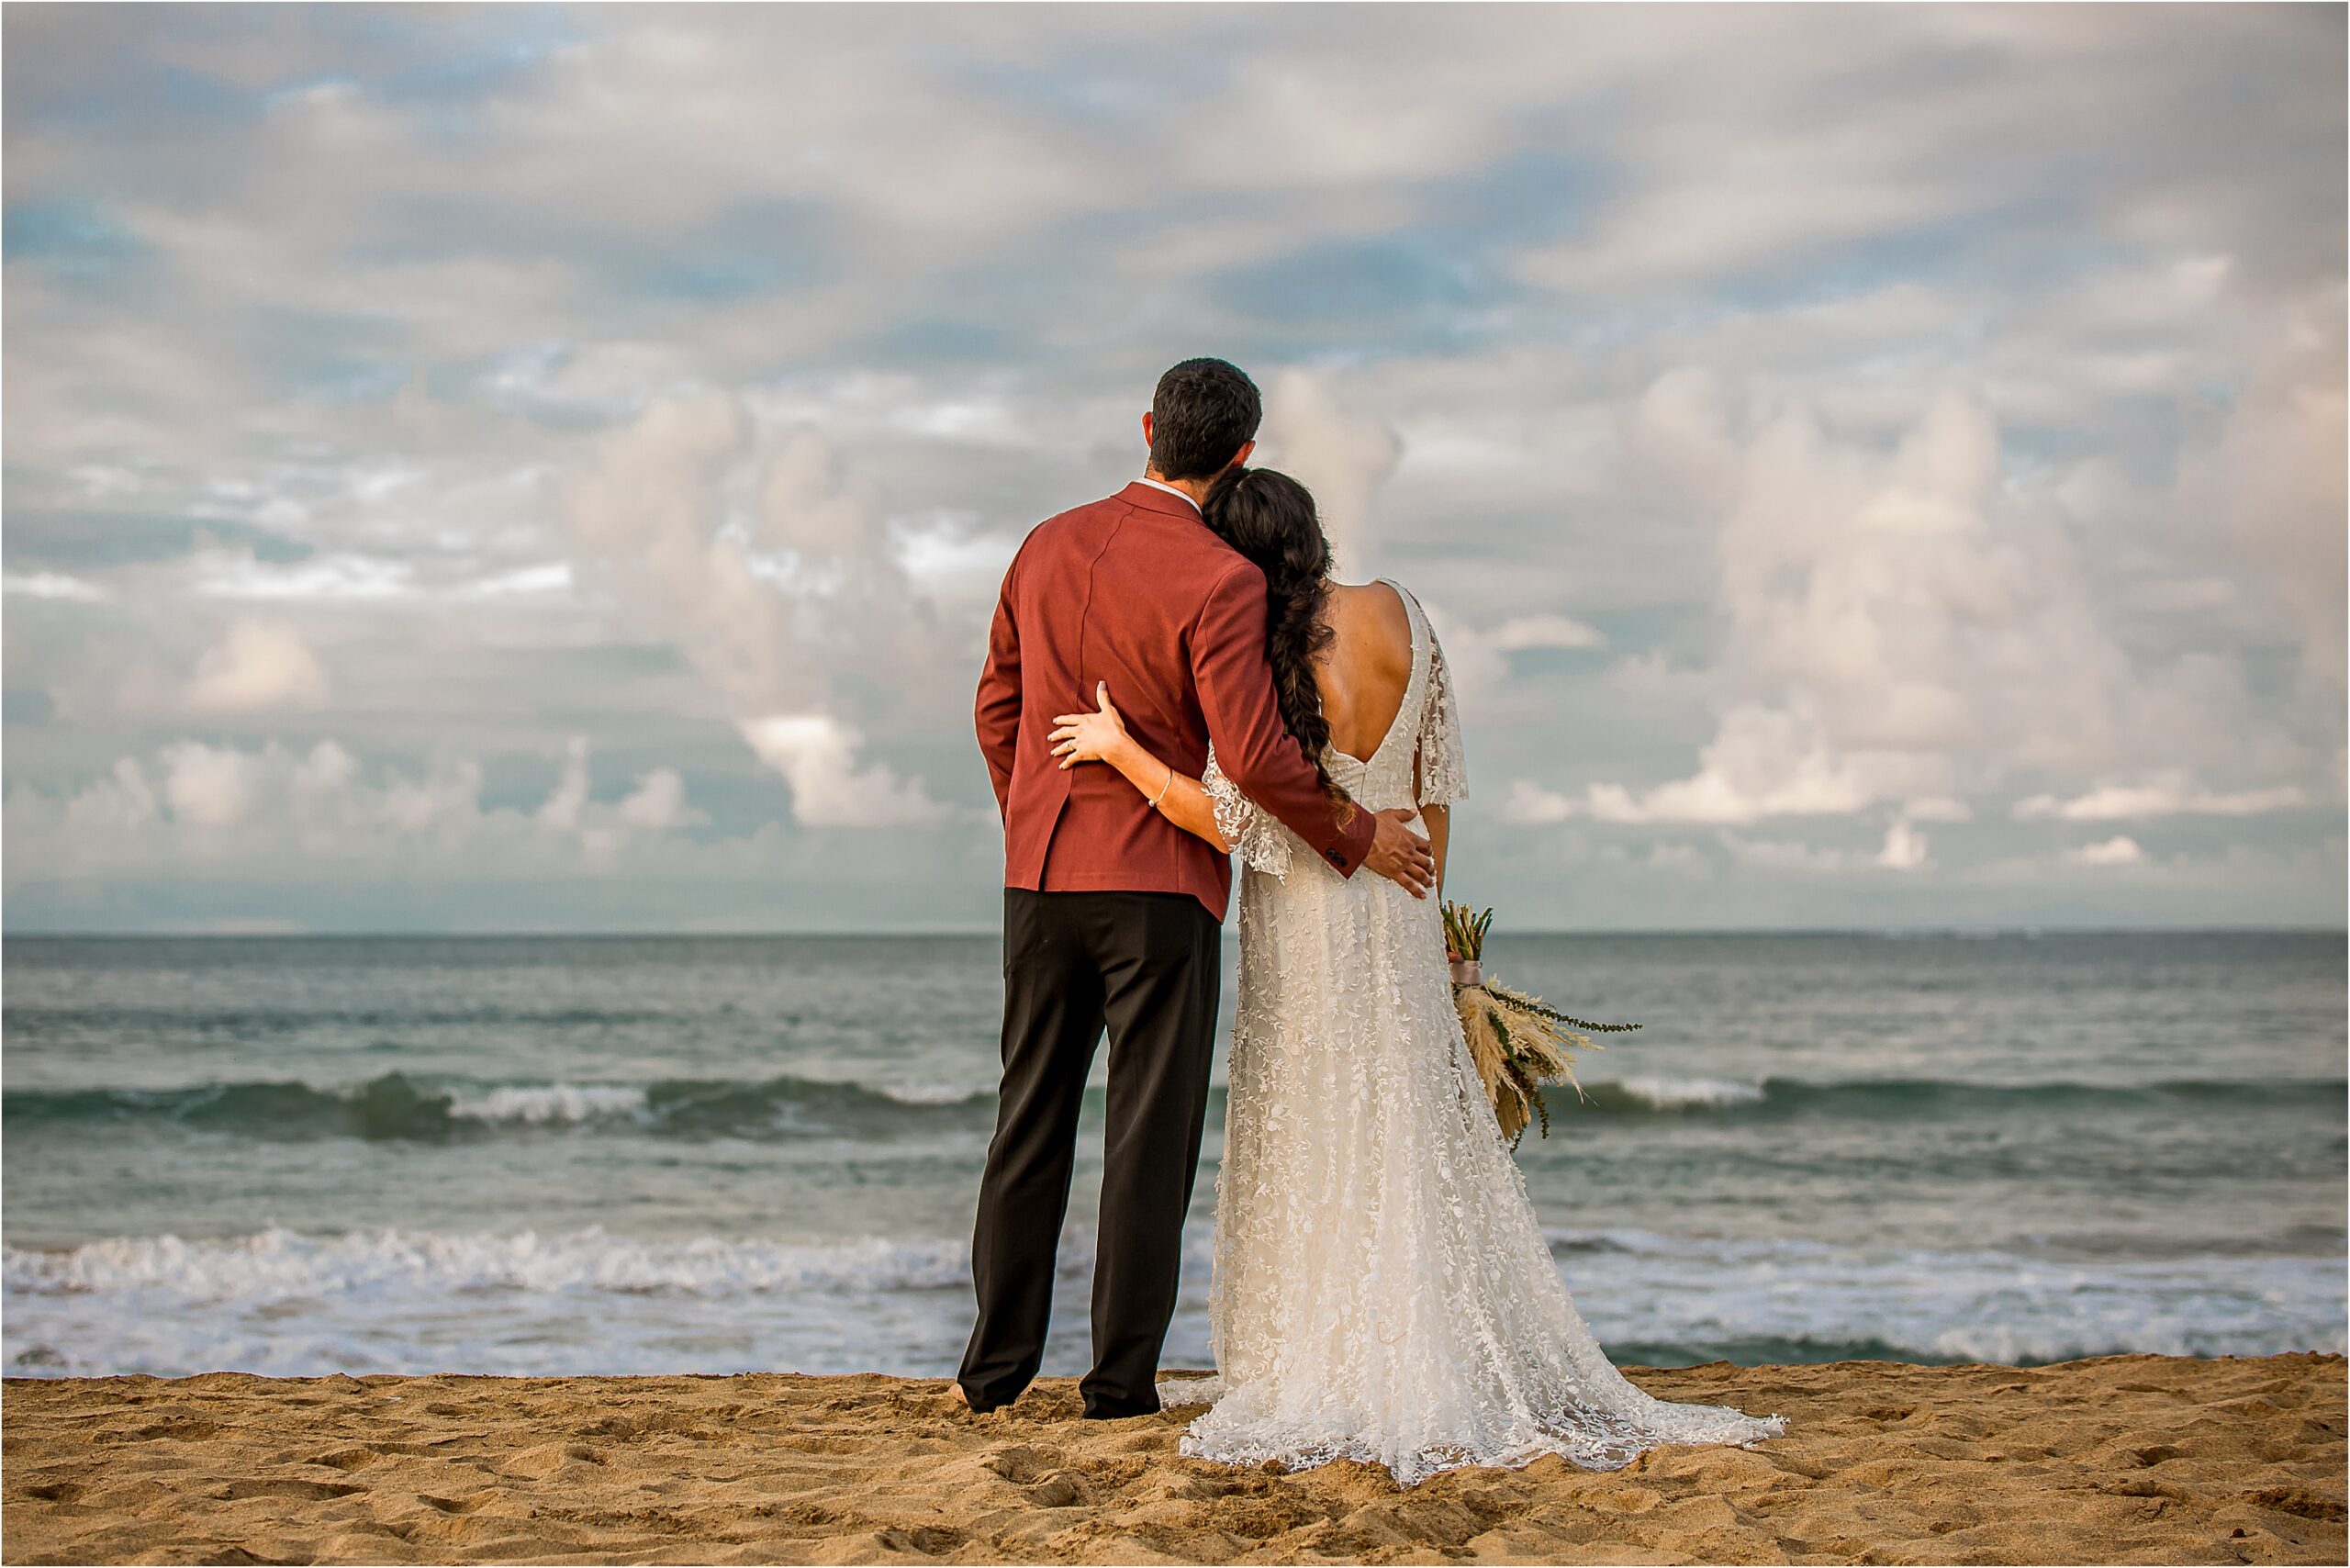 Bride and groom shoulder in shoulder on the beach at sunset for their elopement